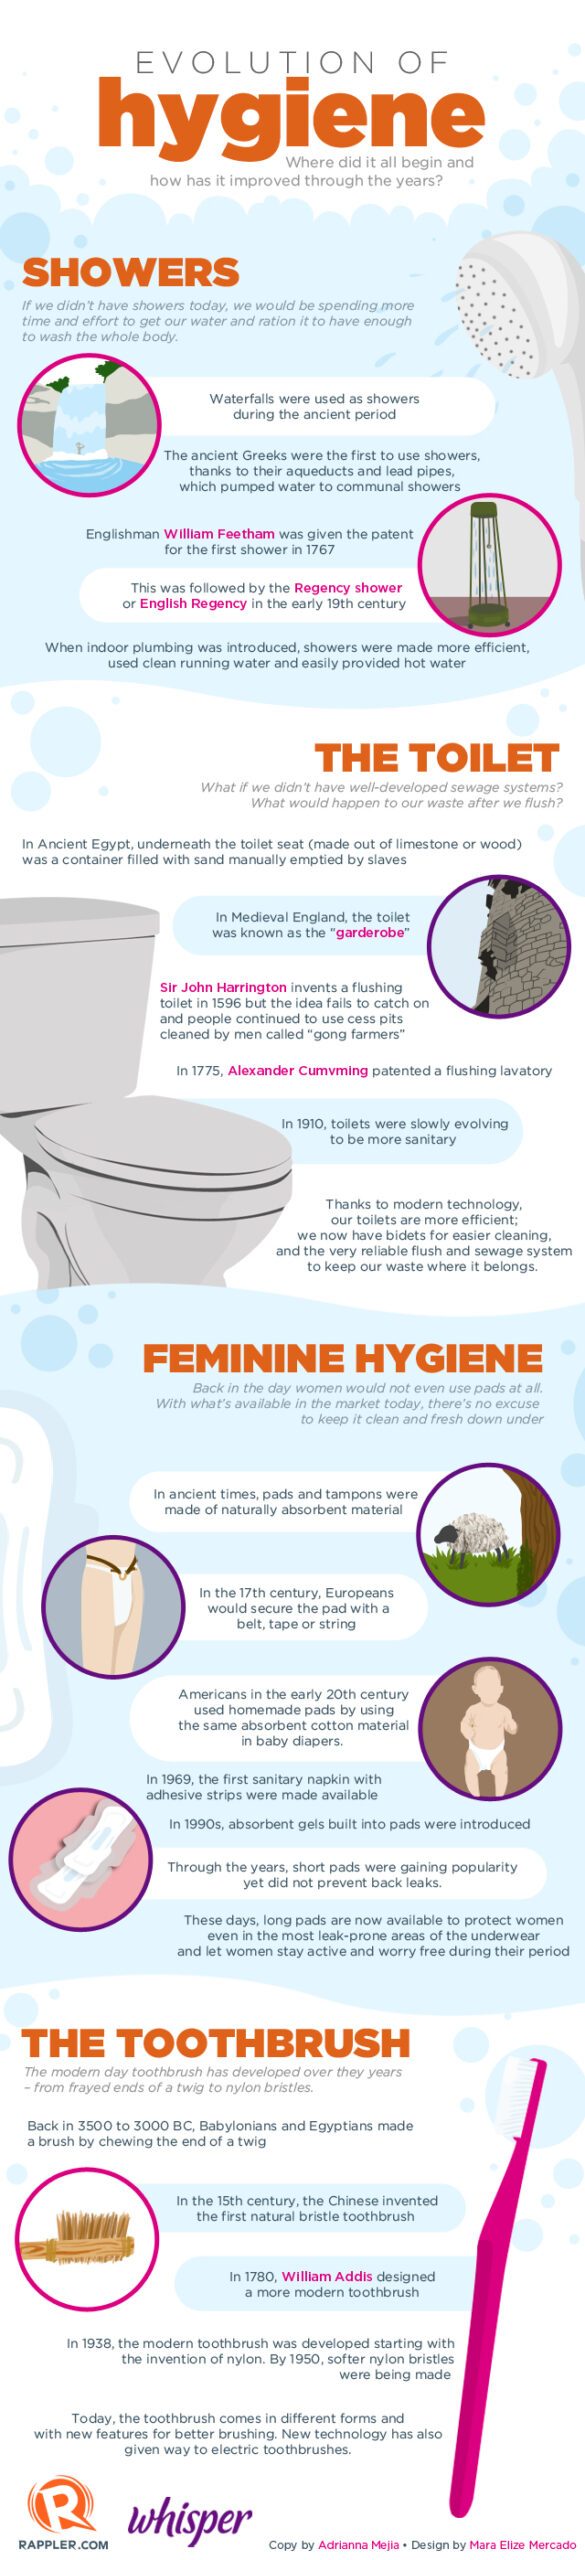 INFOGRAPHIC: The evolution of hygiene